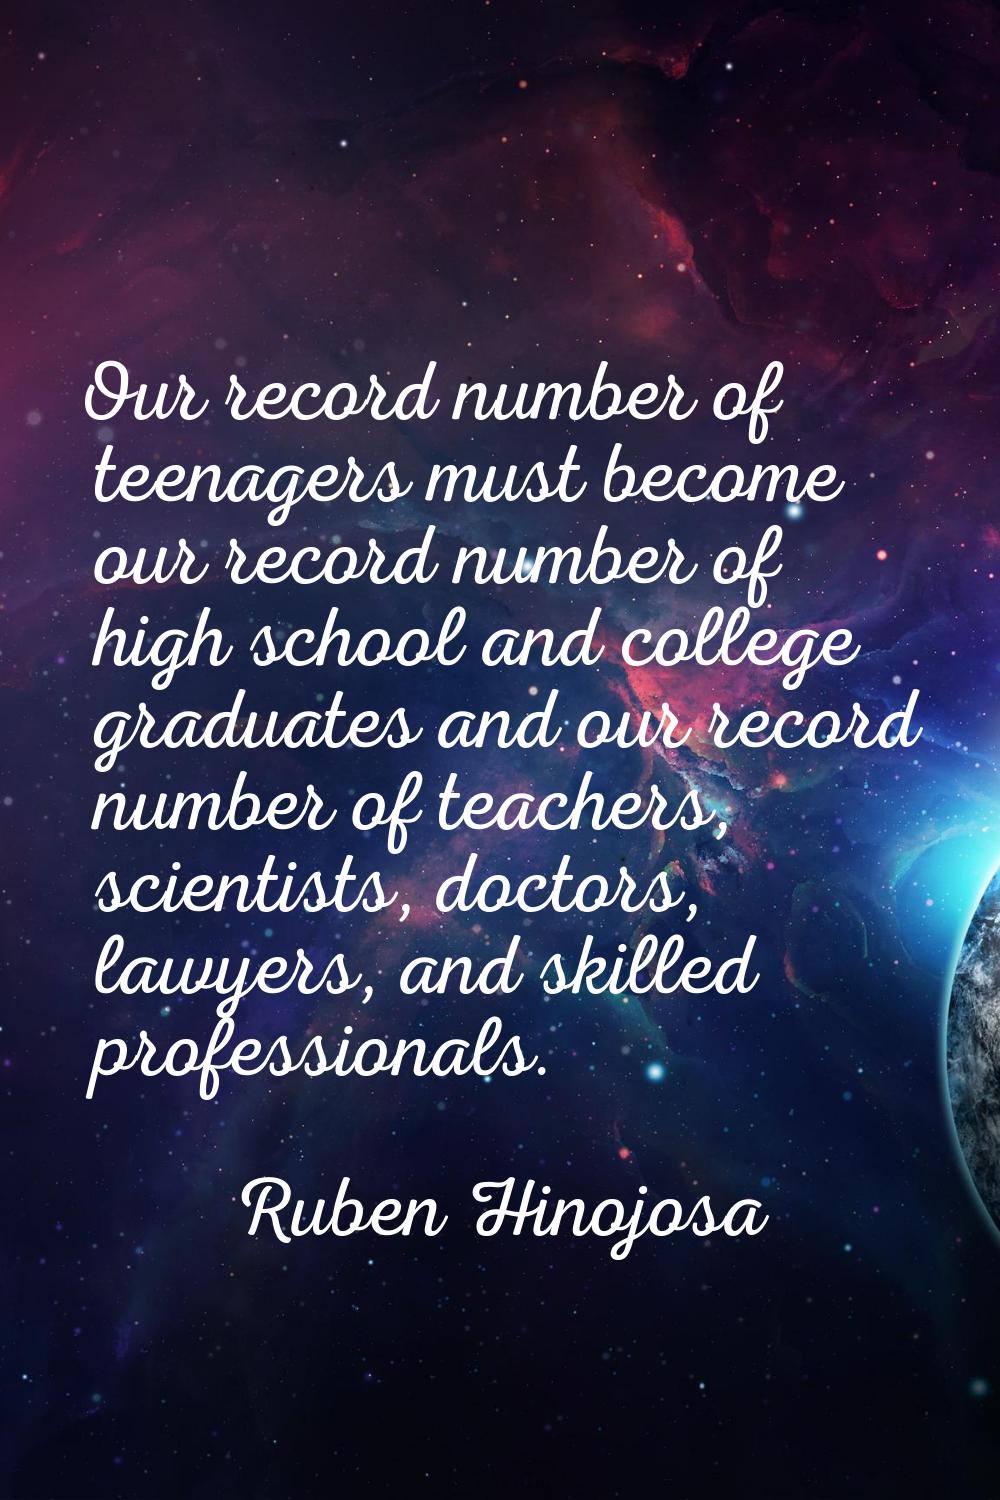 Our record number of teenagers must become our record number of high school and college graduates a